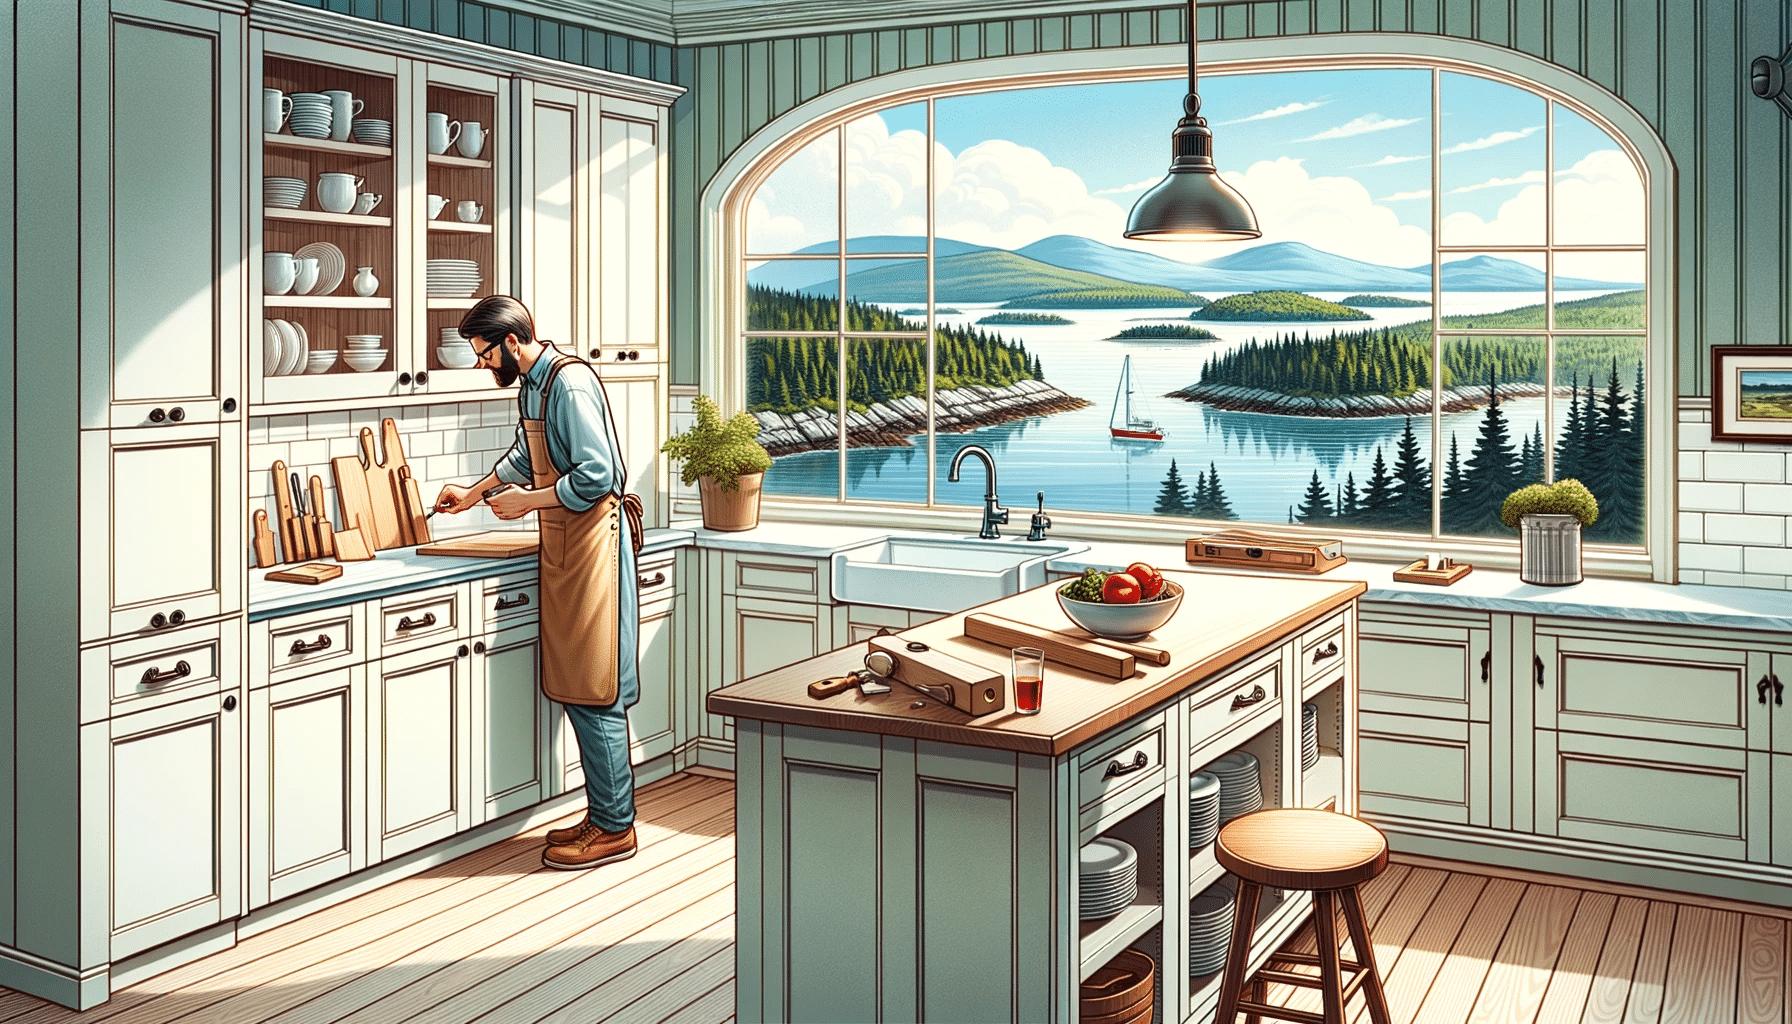 Beautifully Crafted kitchen with man in it